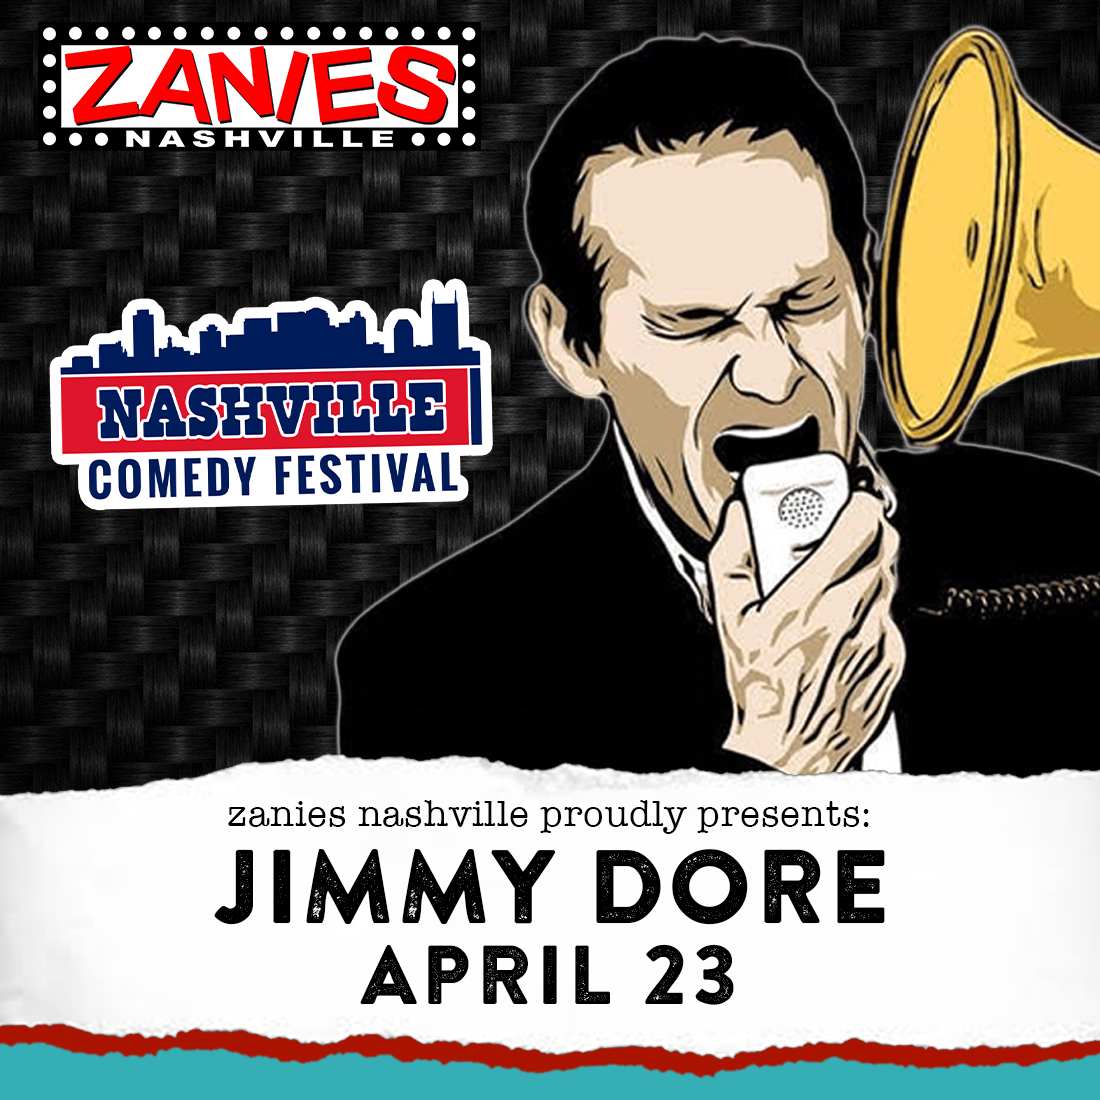 🎙️SECOND SHOW ADDED!
Host of The Jimmy Dore Show and best selling author @jimmy_dore takes the Zanies stage April 23 as part of the @NashComedyFest! You know you don't want to miss this show, so grab your tix while you can, Nashville--> bit.ly/NCF_JimmyDore